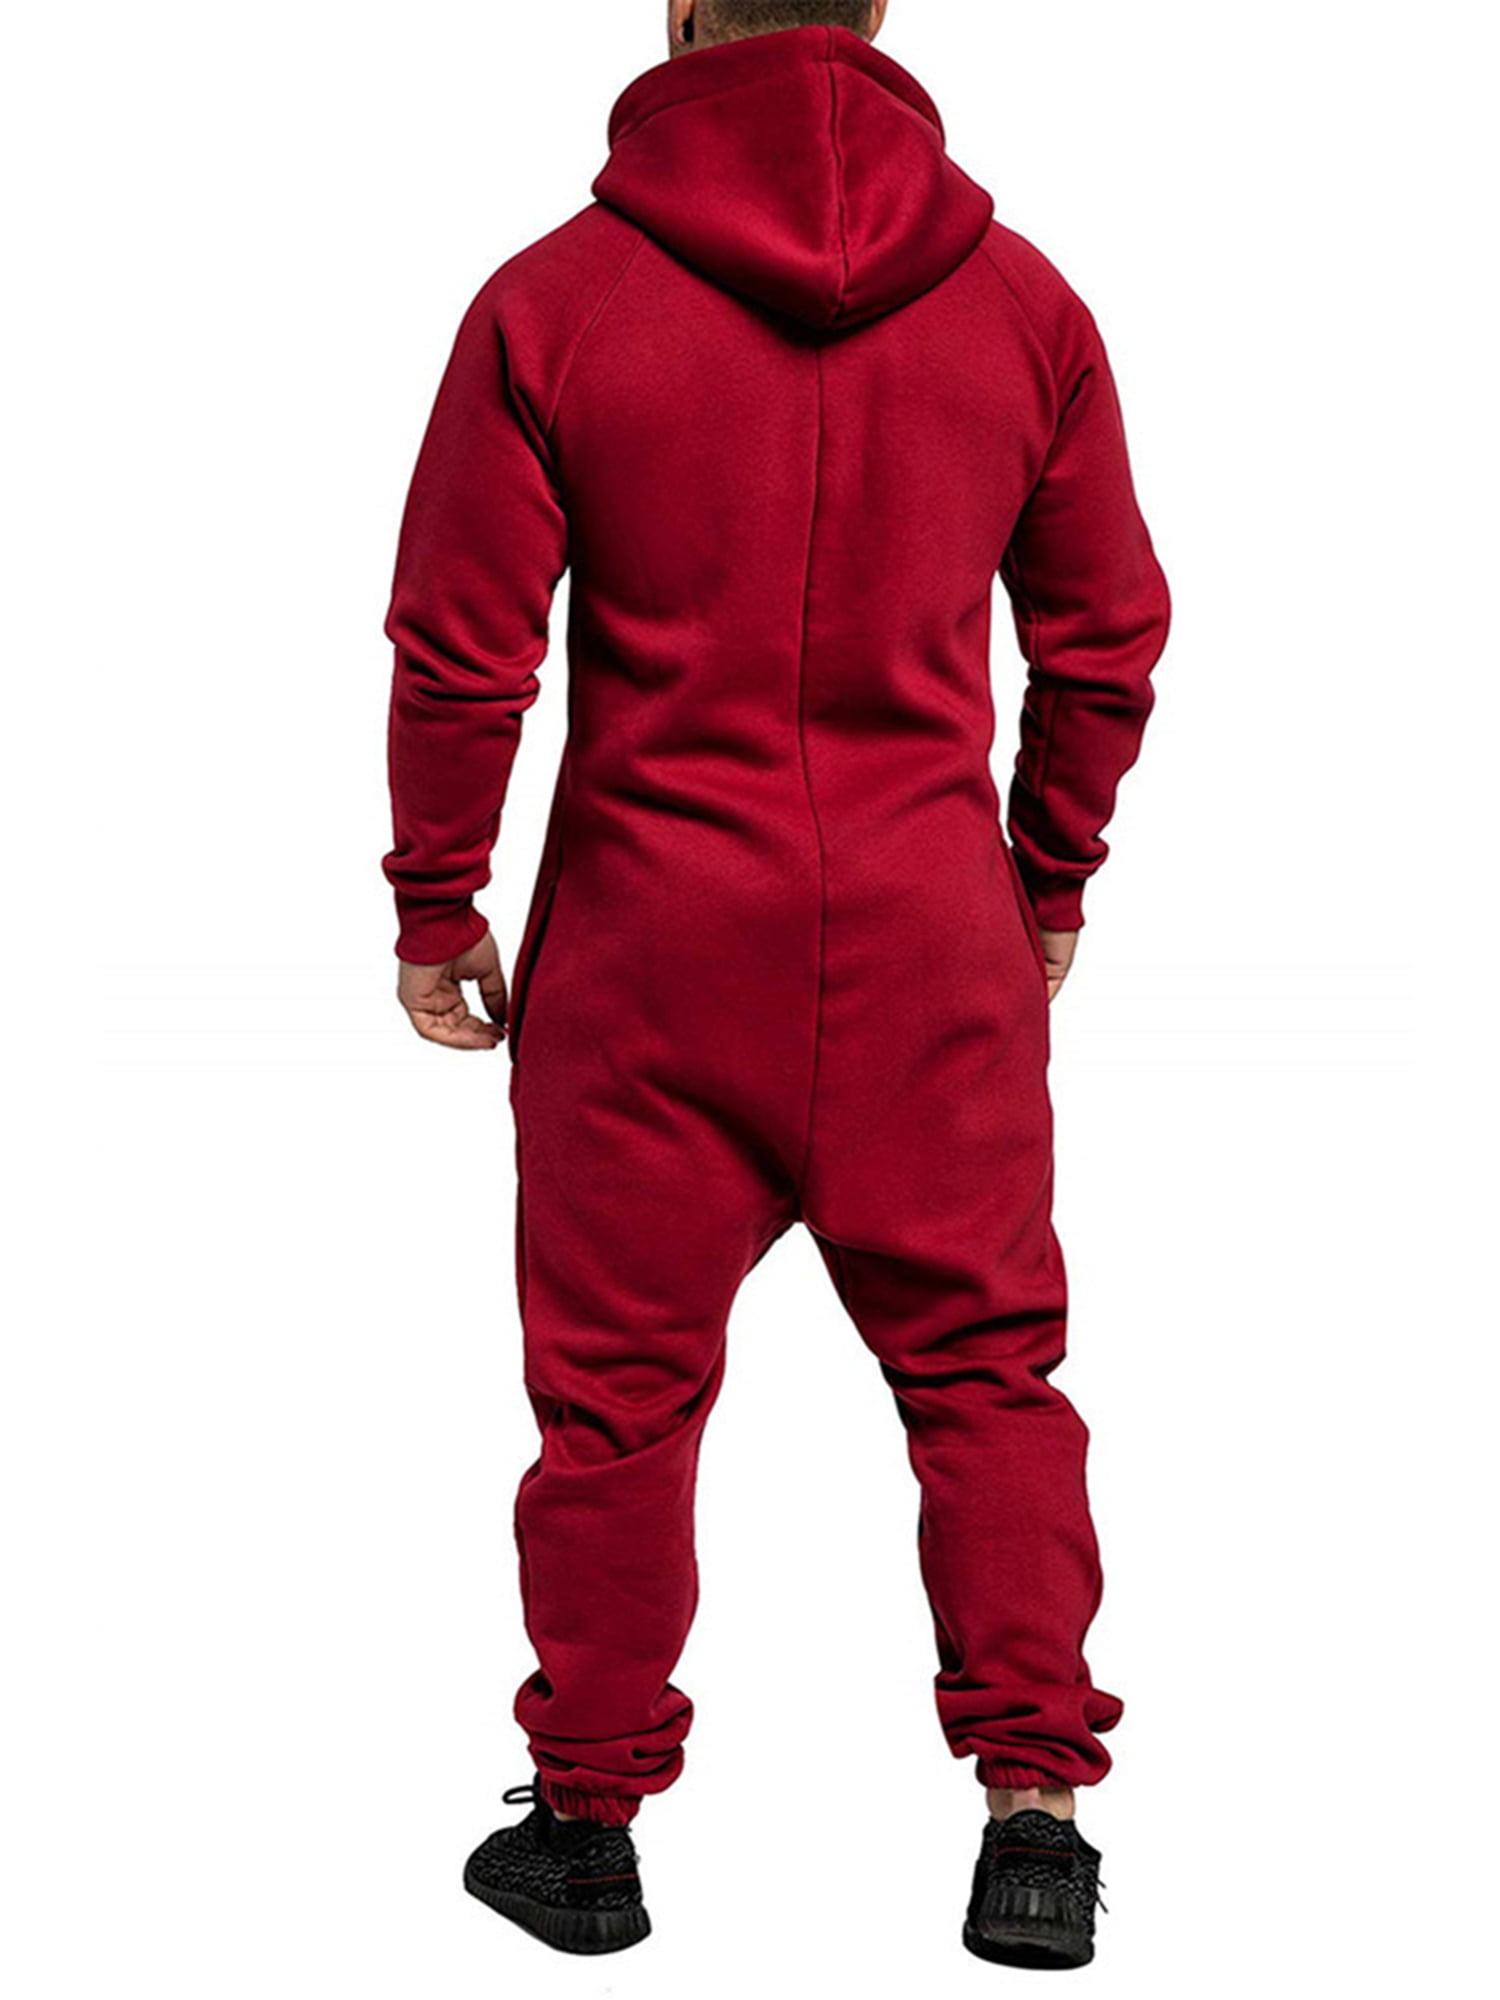 Mens Unisex One Piece Hoodies Pajamas Jumpsuit Warm Nightwear Solid Color Zipper Non Footed Pajama Playsuit 